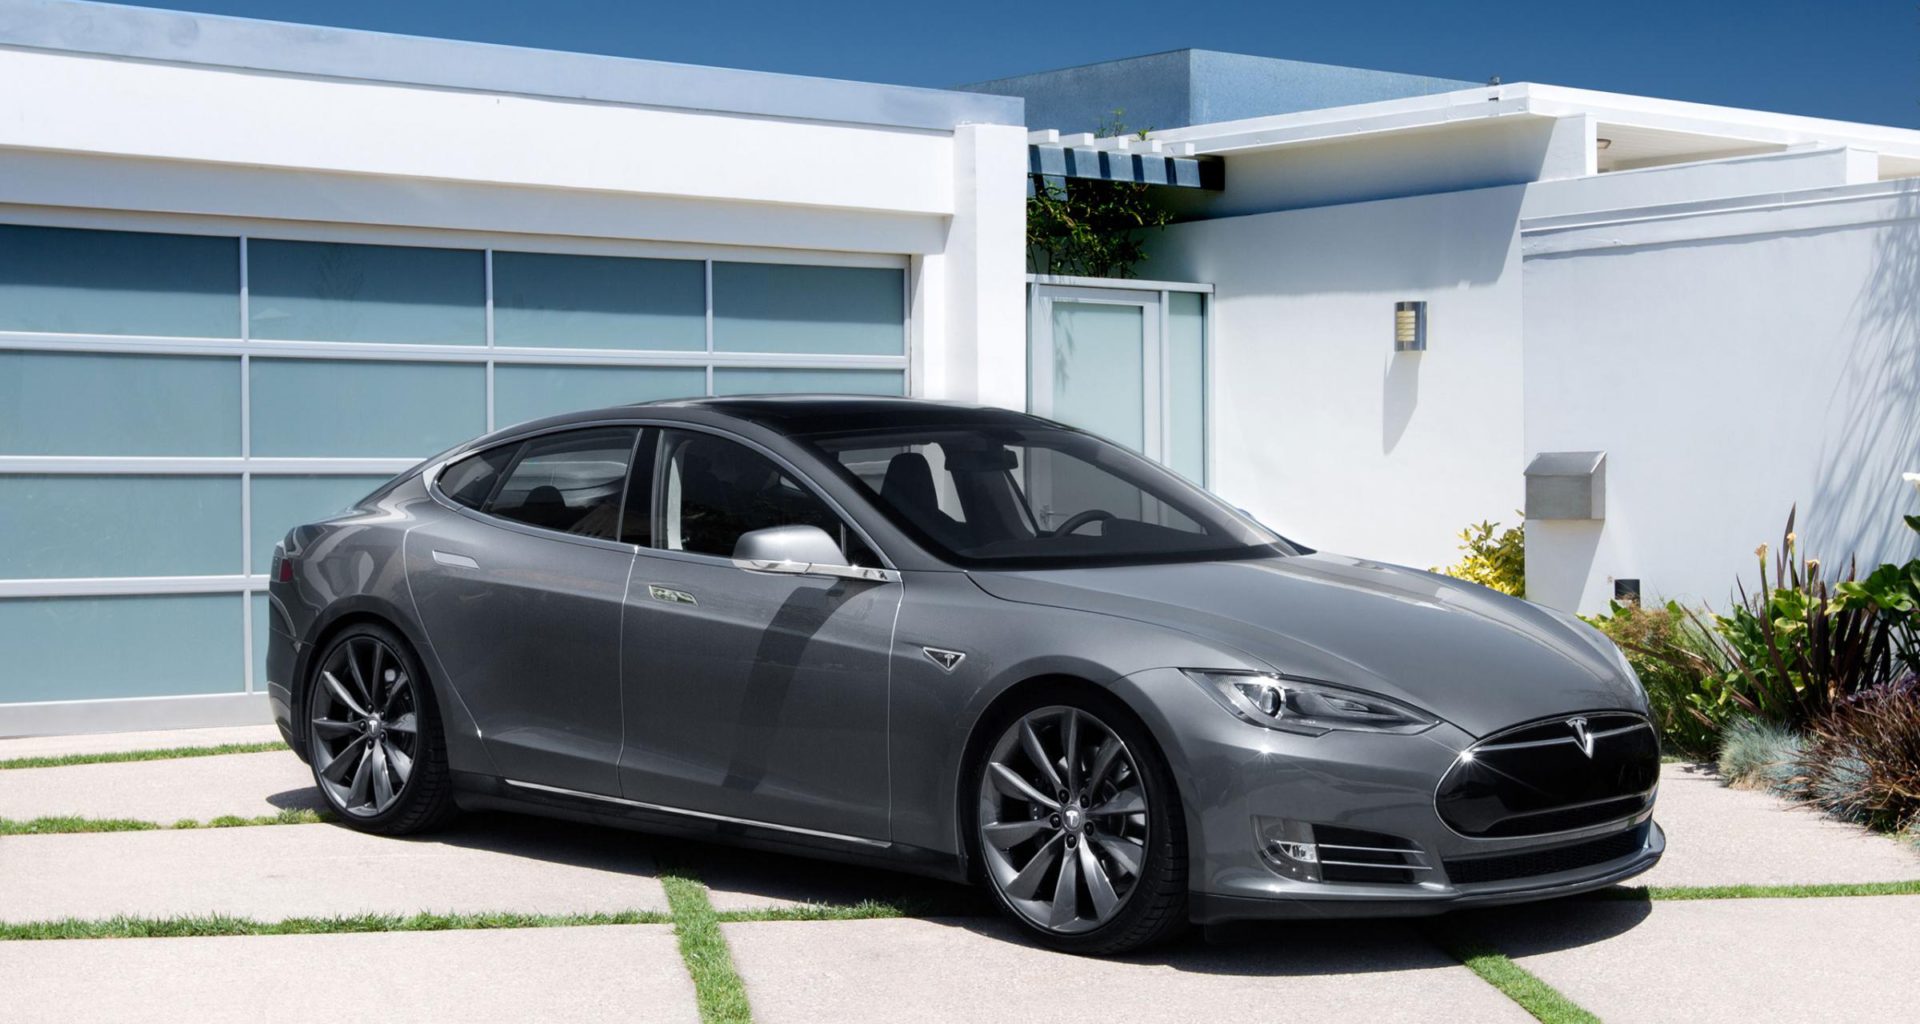 A Tesla Model S parked in the driveway